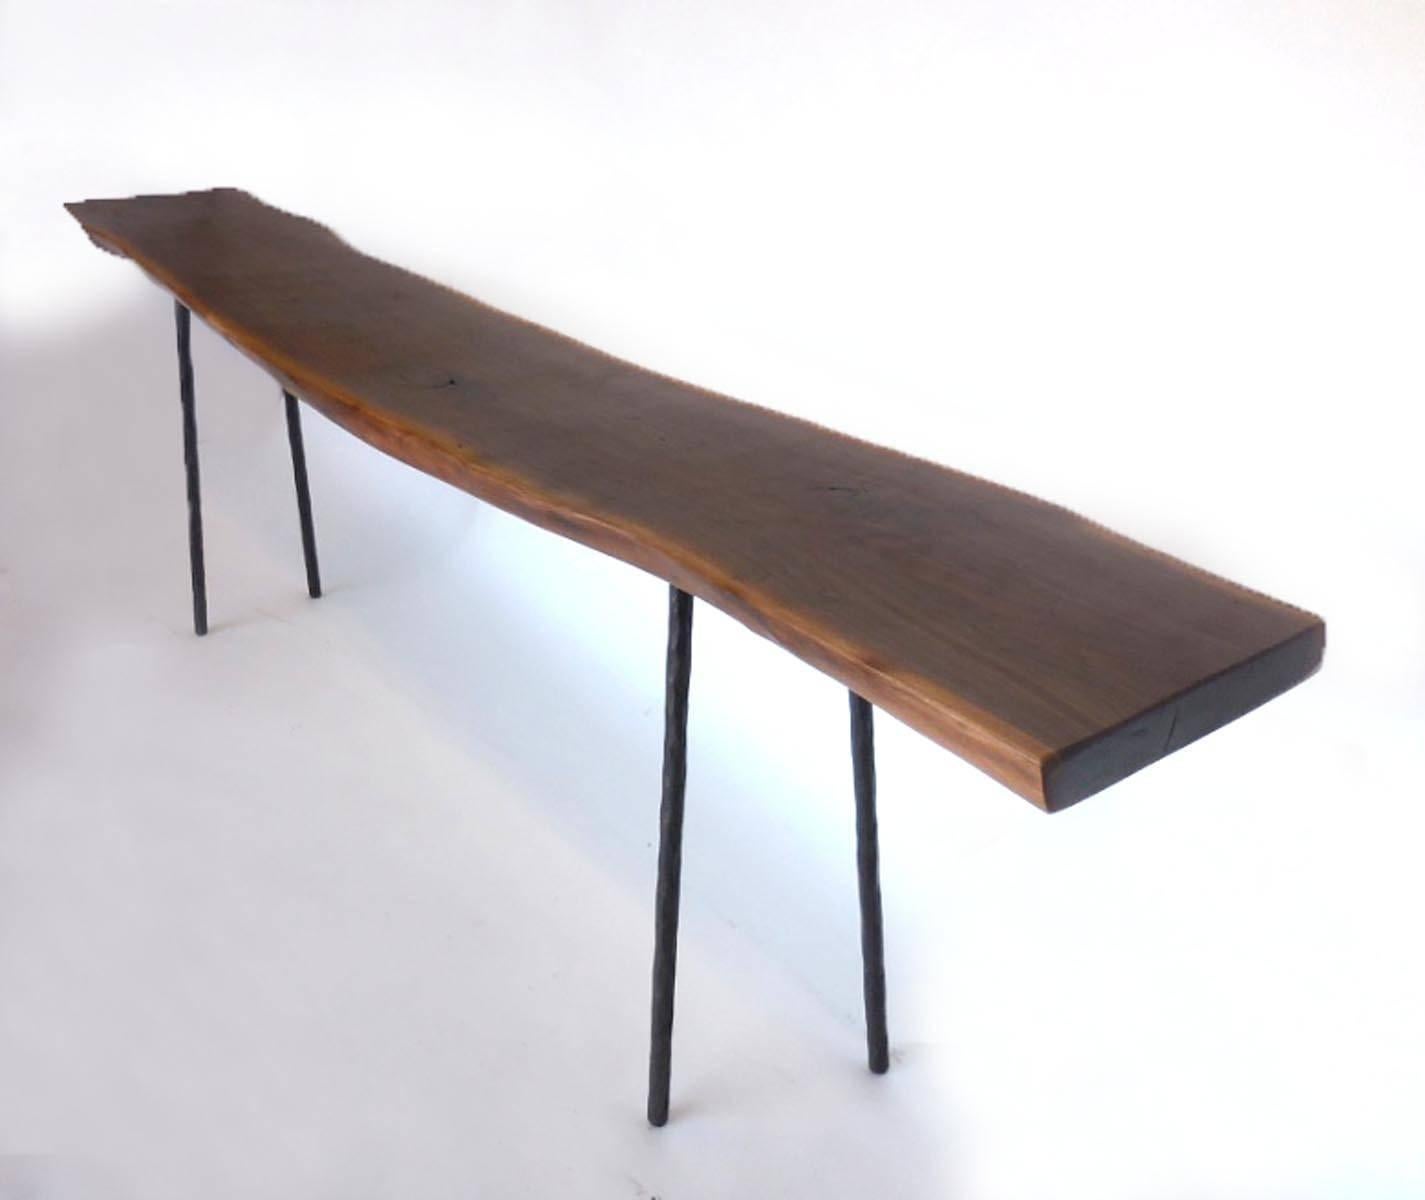 One of a kind black walnut live edge console with hand-forged iron legs. Gorgeous wood! Narrow profile. Elegant, modern , clean, airy, organic shape.